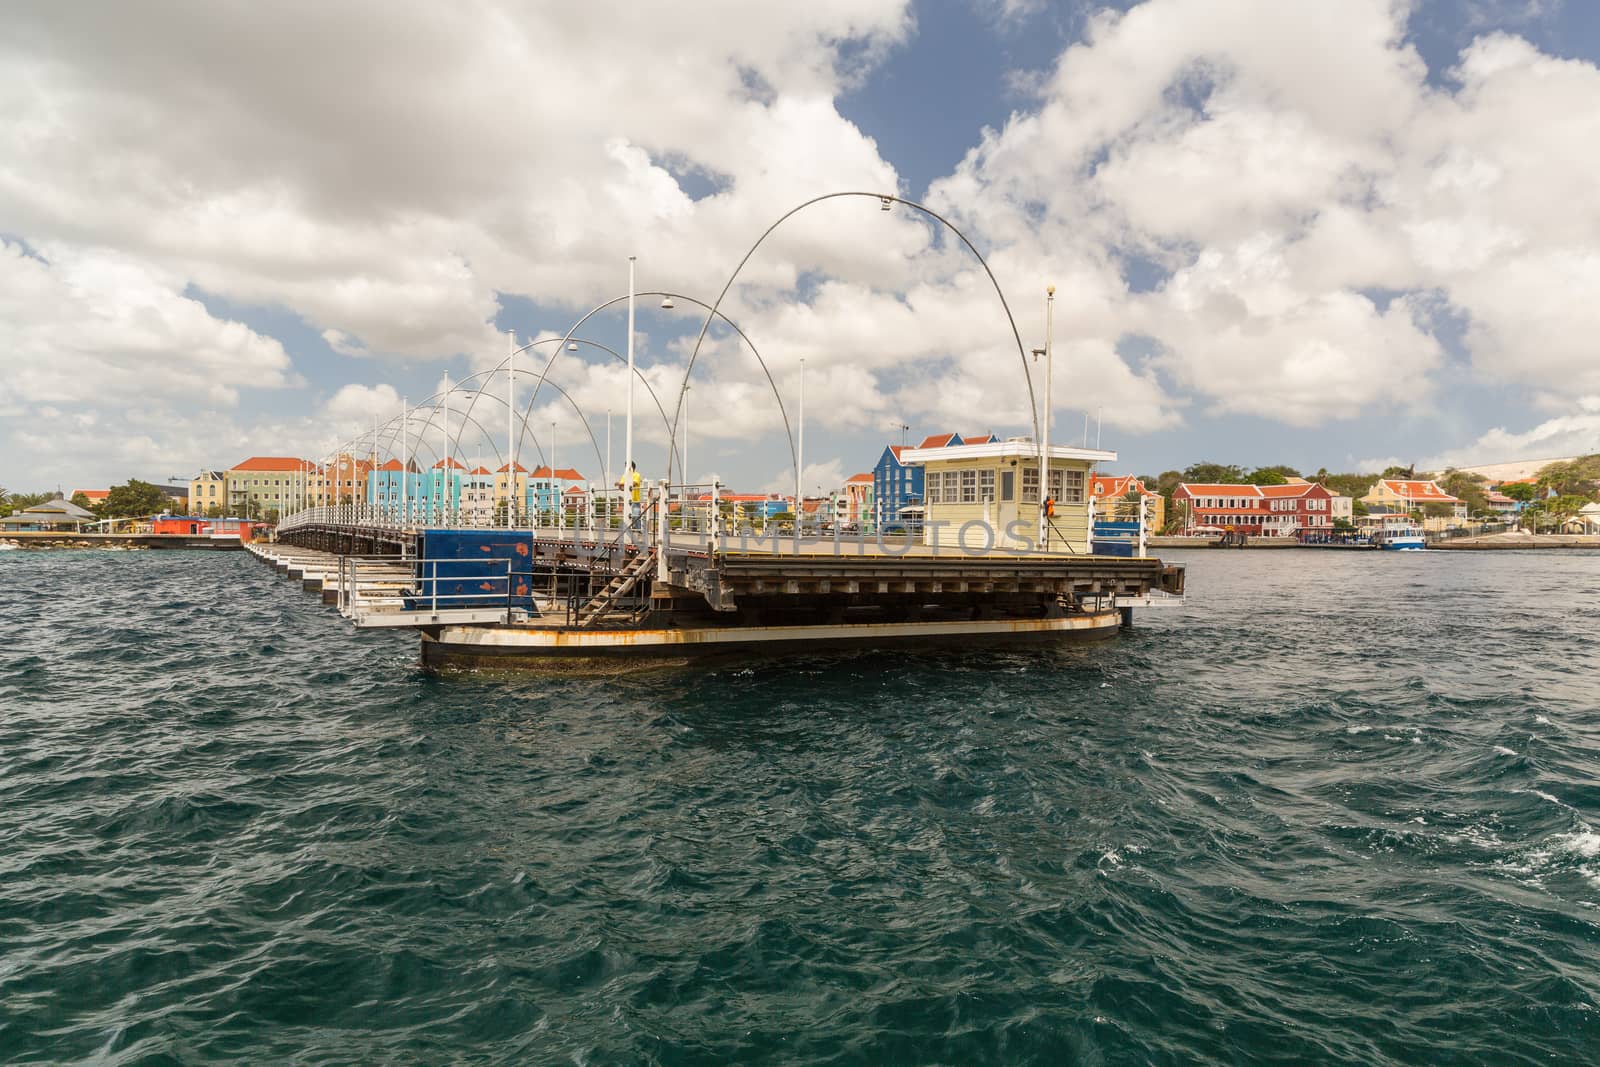 The Queen Emma Bridge is a pontoon bridge across St. Anna Bay in Curaçao. It connects the Punda and Otrobanda quarters of the capital city, Willemstad. The bridge is hinged and opens regularly to enable the passage of oceangoing vessels.